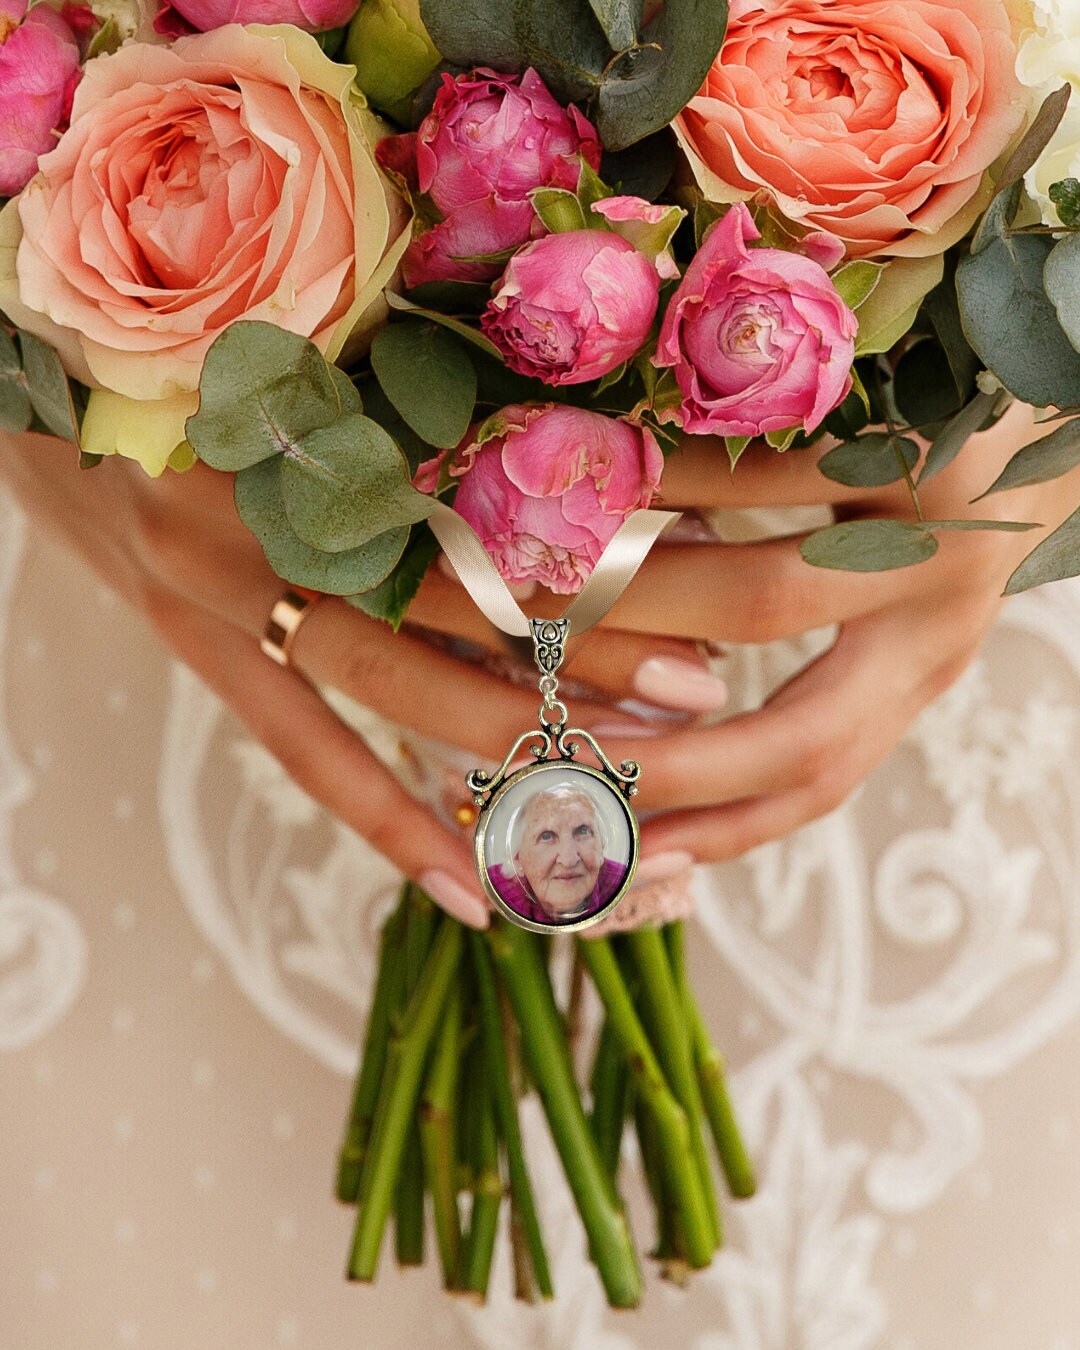 Bridal Bouquet Charm Photo Memorial Charm In Memory Of Mom, 52% OFF